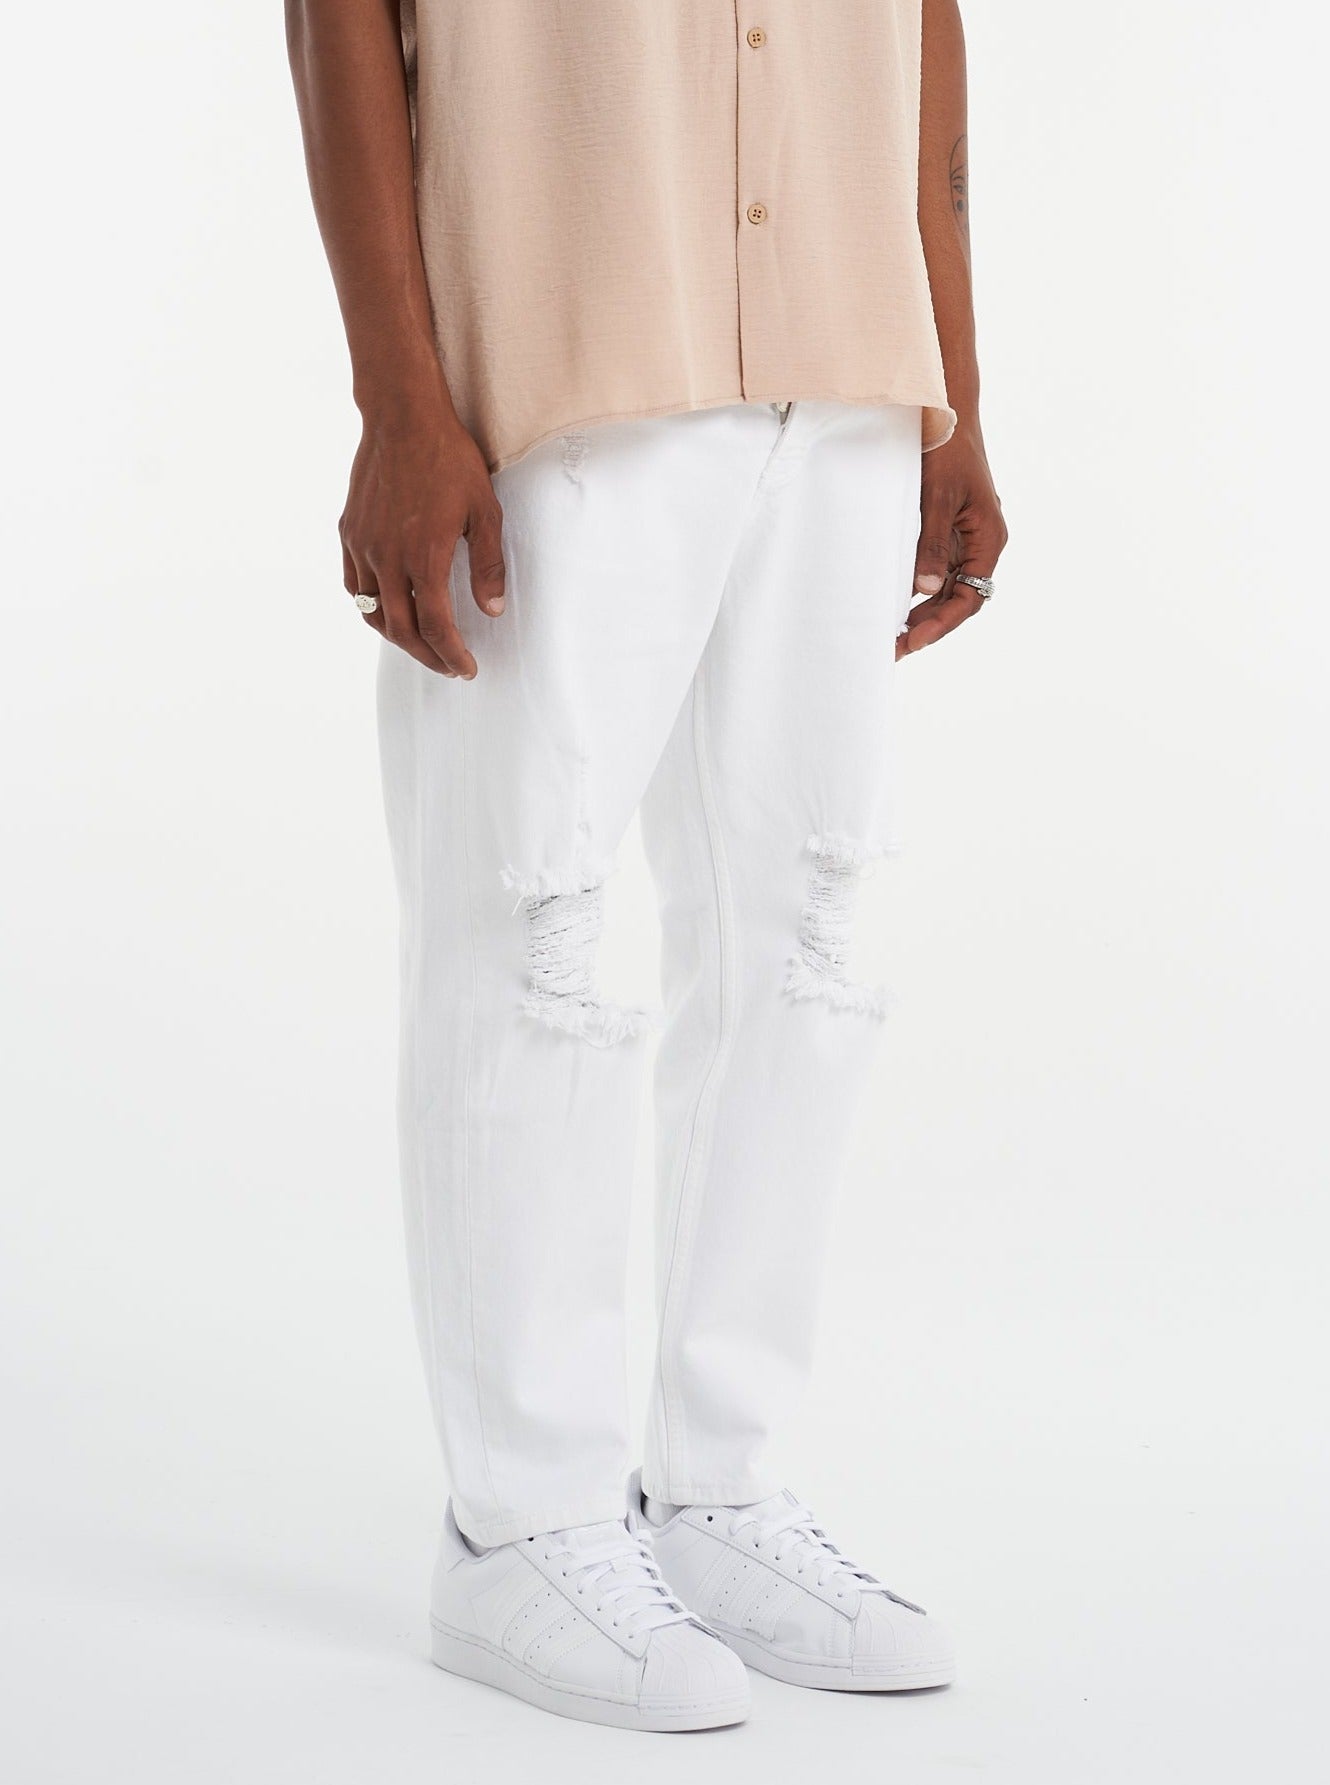 Relaxed Fit Ripped White Jeans - UNEFFECTED STUDIOS® - Pants - UNEFFECTED STUDIOS®